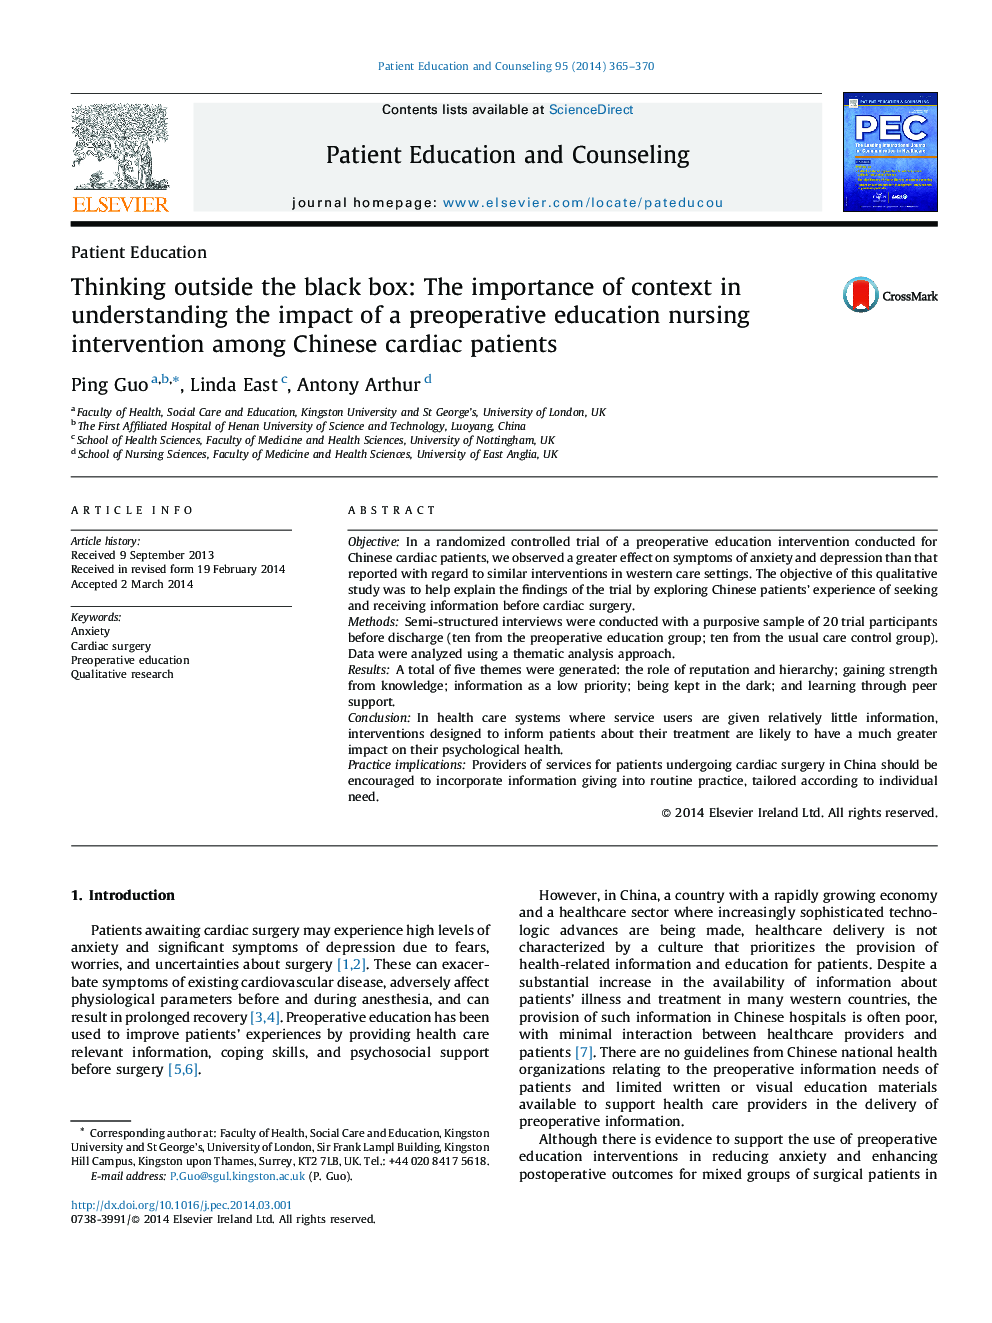 Thinking outside the black box: The importance of context in understanding the impact of a preoperative education nursing intervention among Chinese cardiac patients